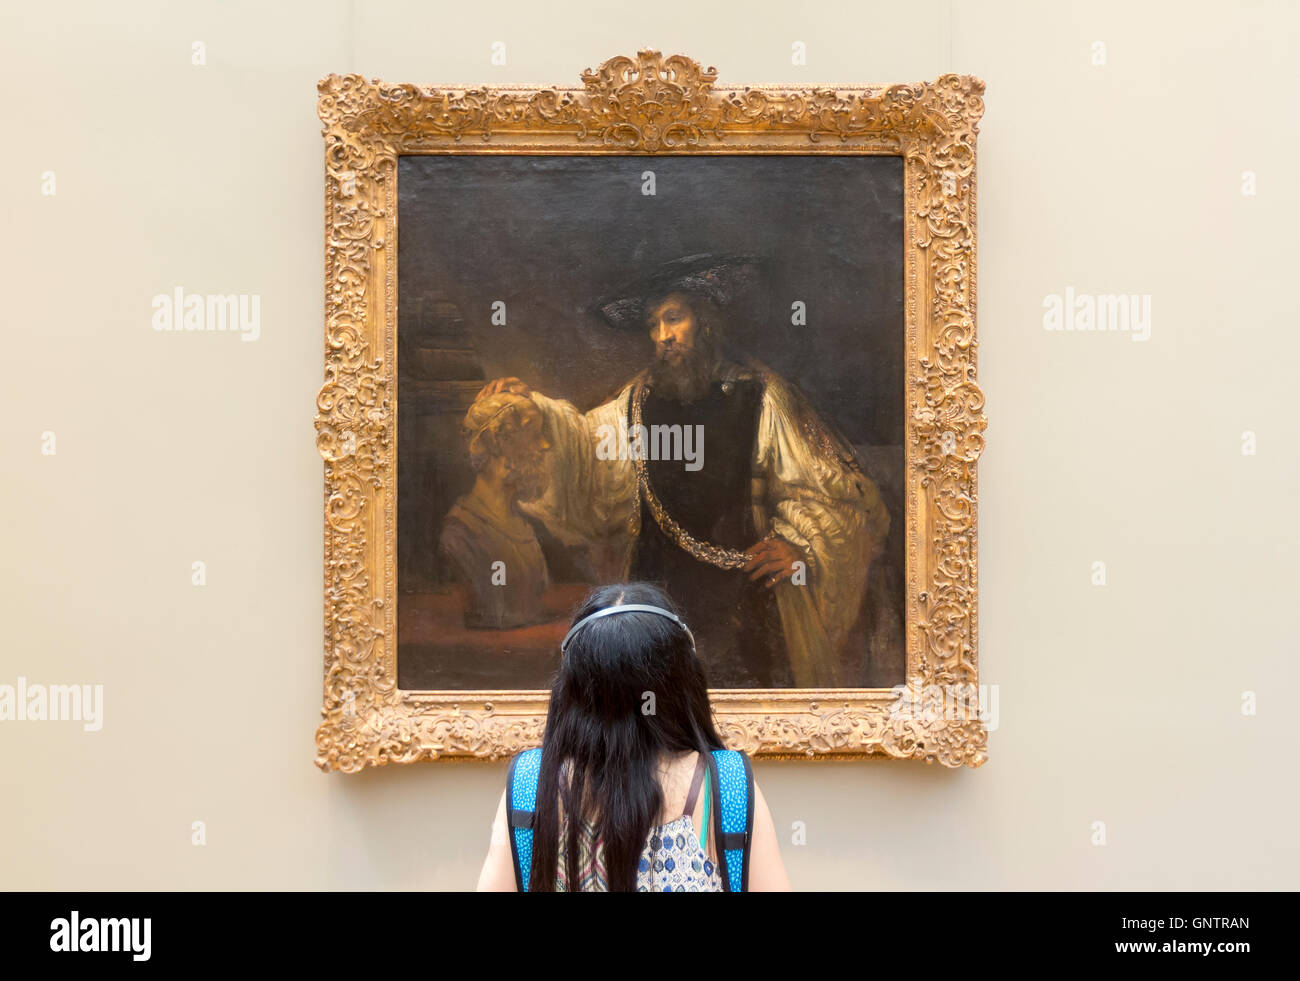 Observing Art High Resolution Stock Photography and Images - Alamy